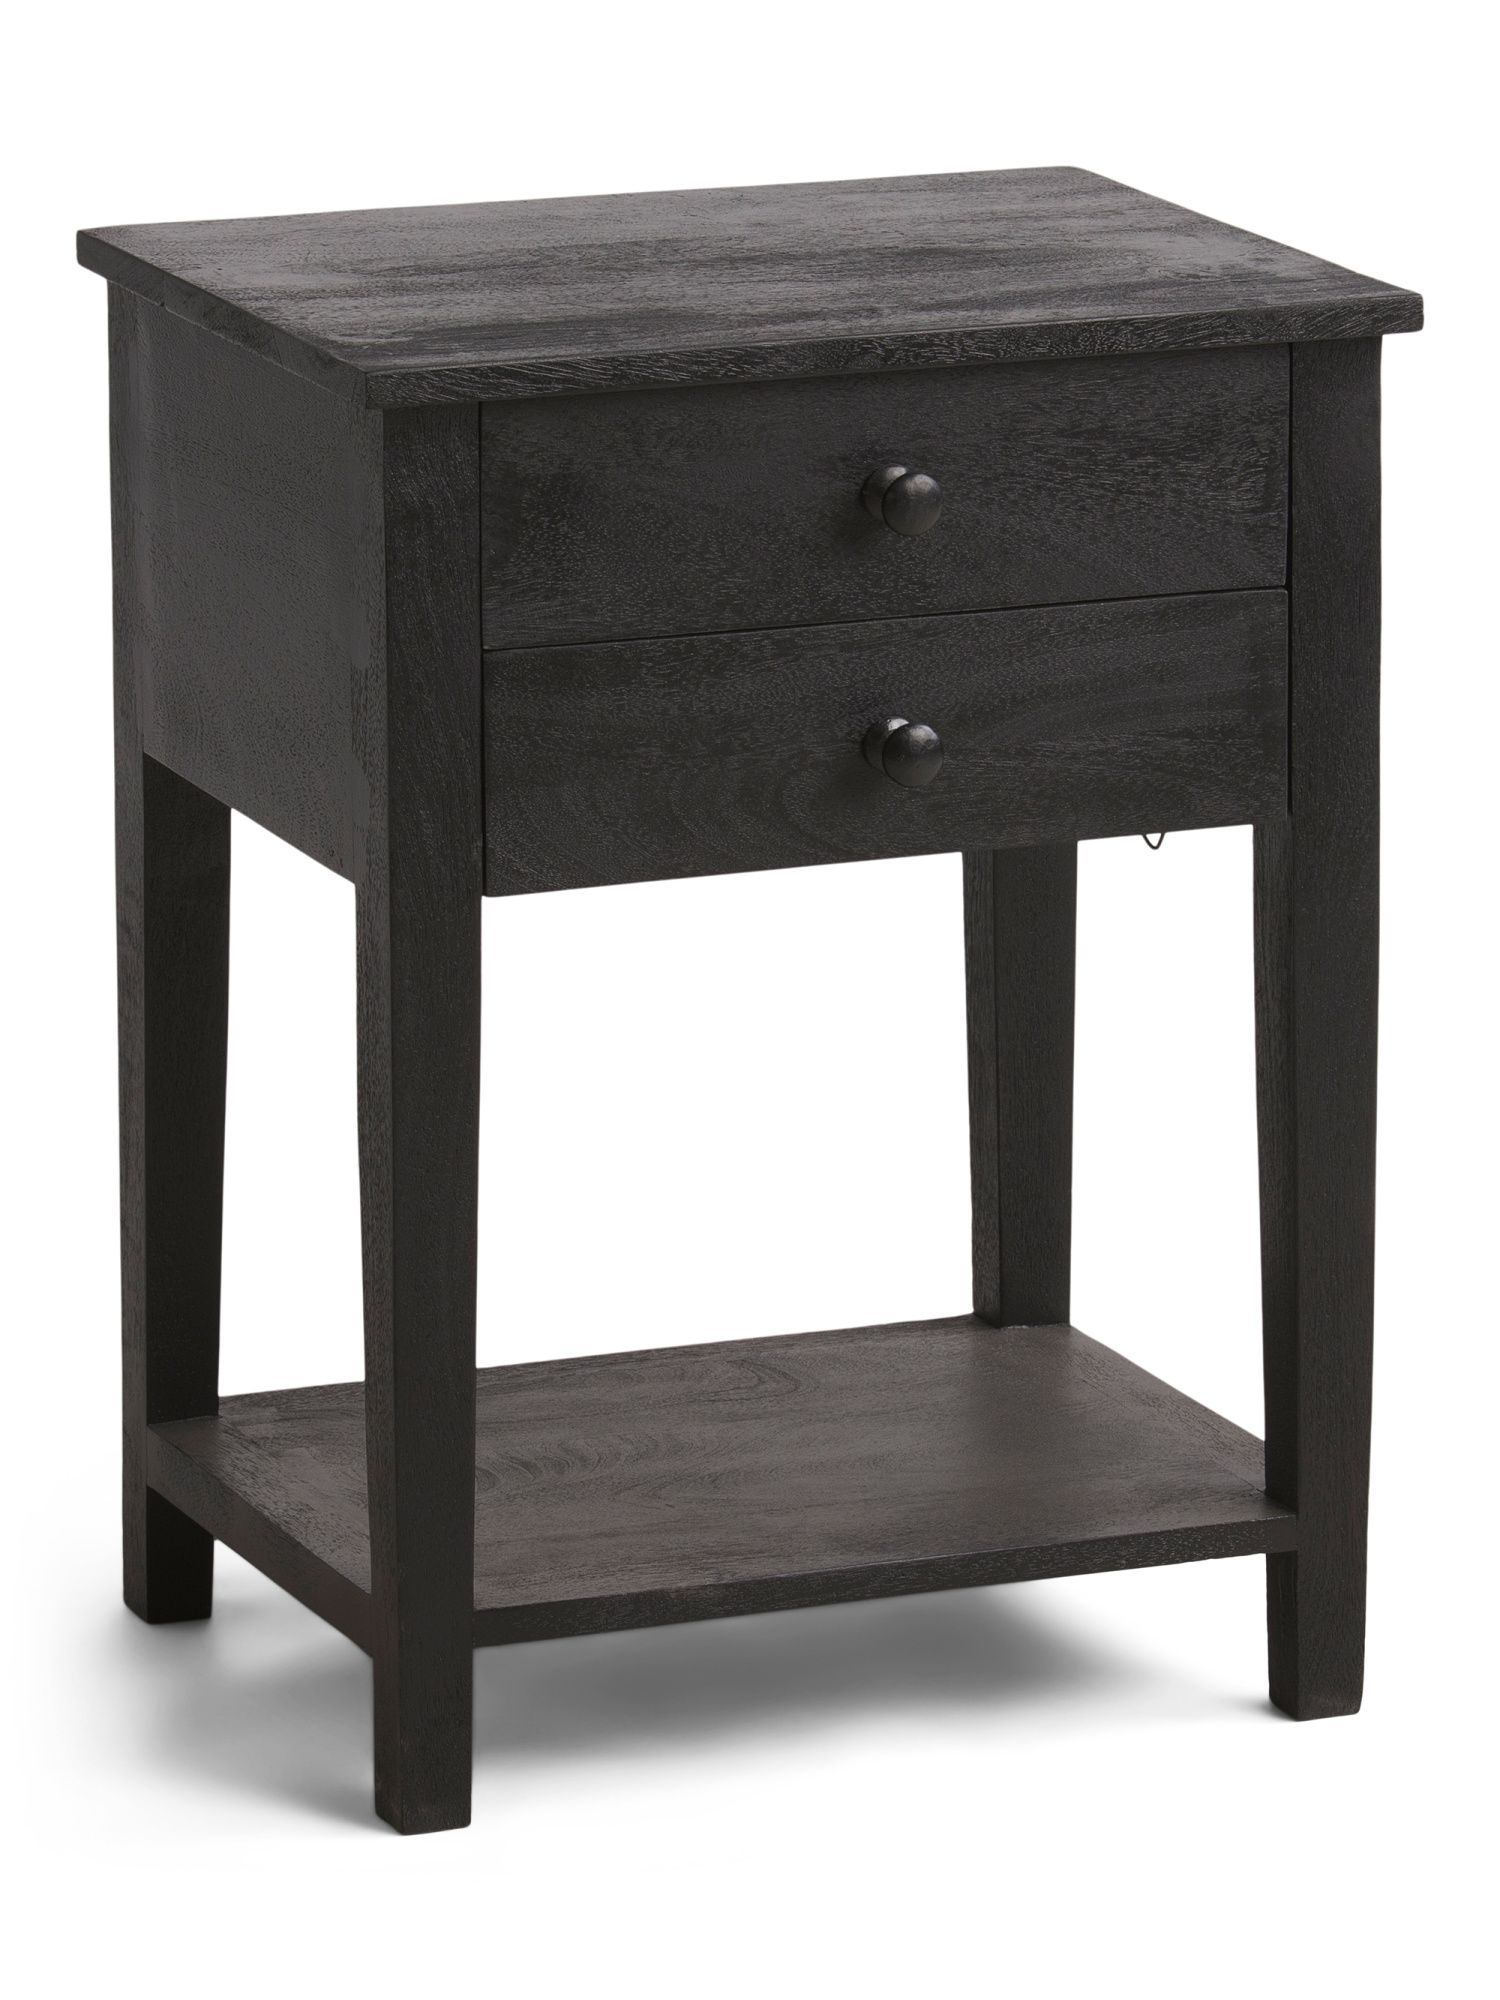 2 Drawer Wooden Side Table | TJ Maxx